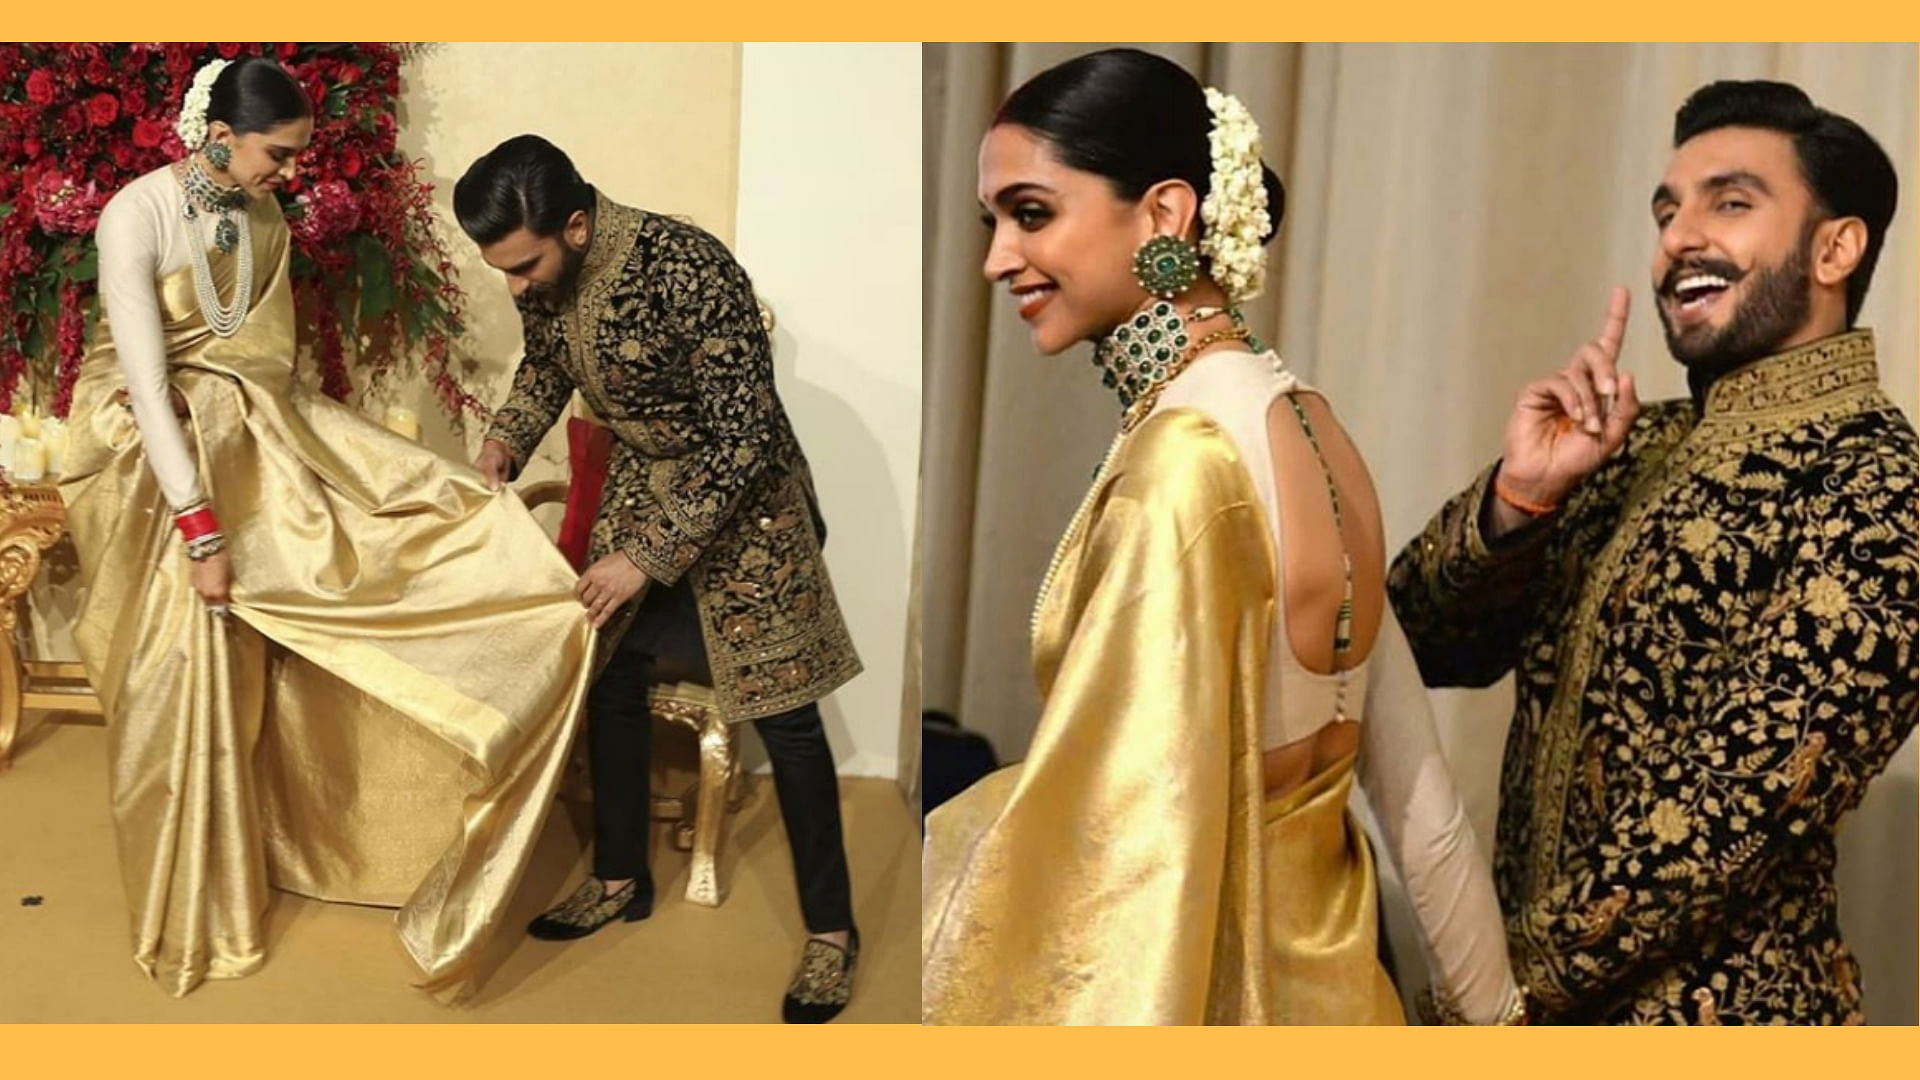 Candid moments from the Deepika Padukone and Ranveer Singh reception in Bangalore.